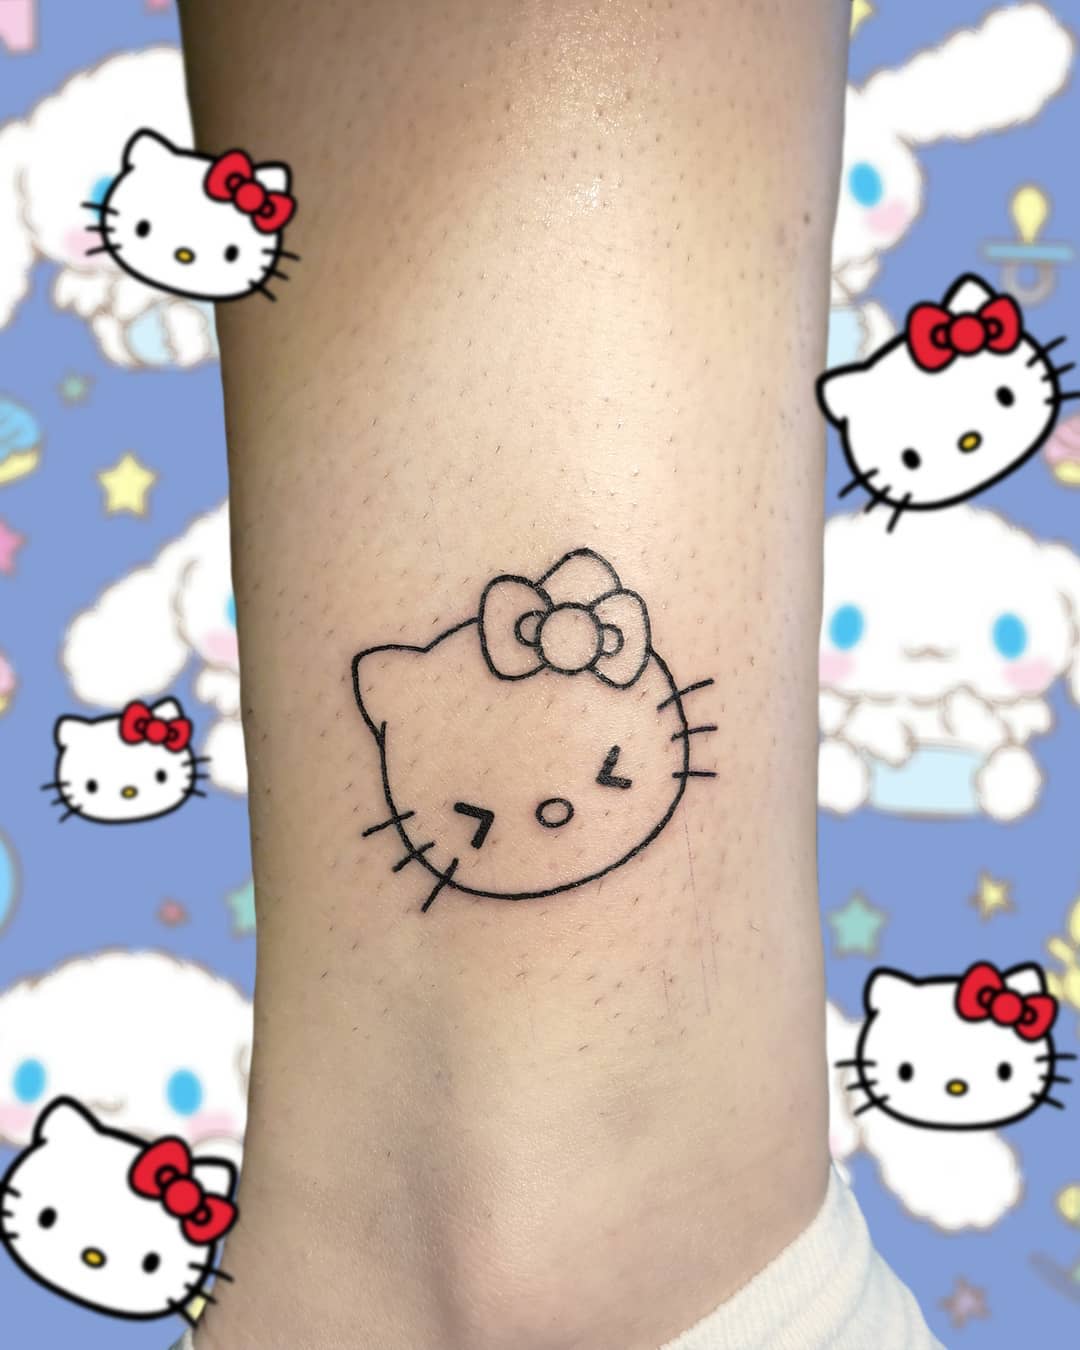 50+Amazing Hello Kitty Tattoo Designs with Meanings, Ideas, and Celebrities  - Body Art Guru